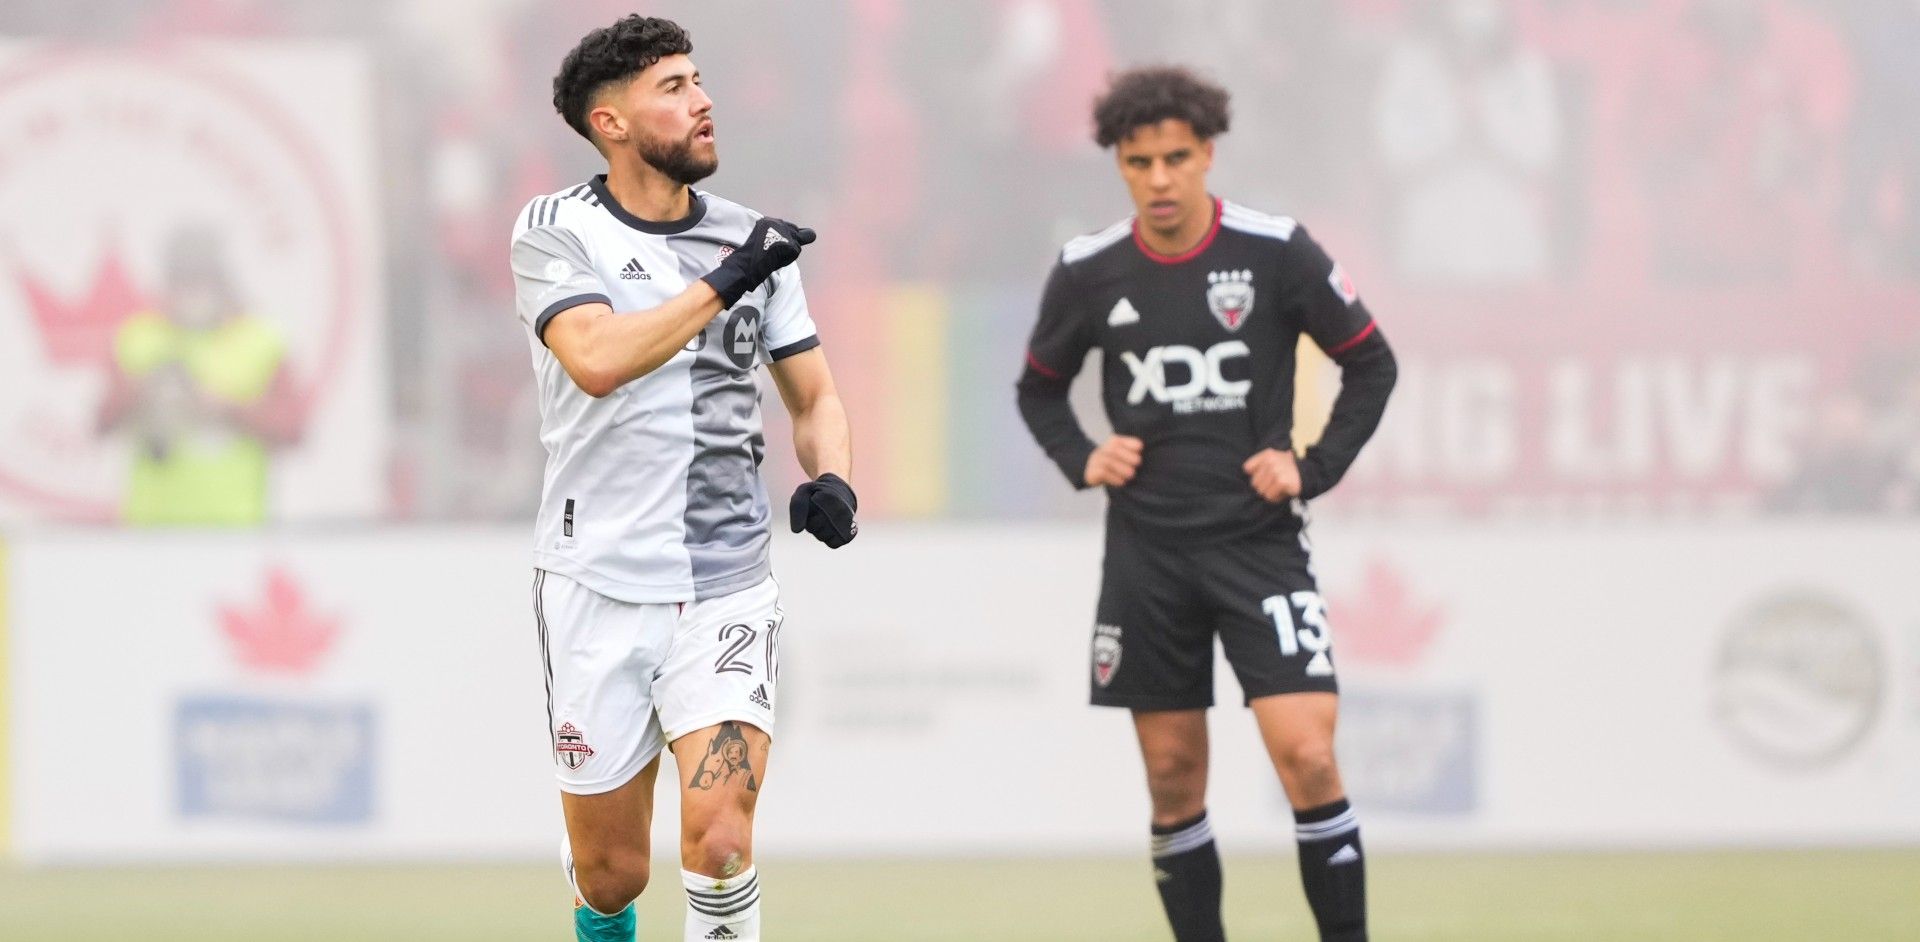 Toronto FC vs. D.C. United: What you need to know